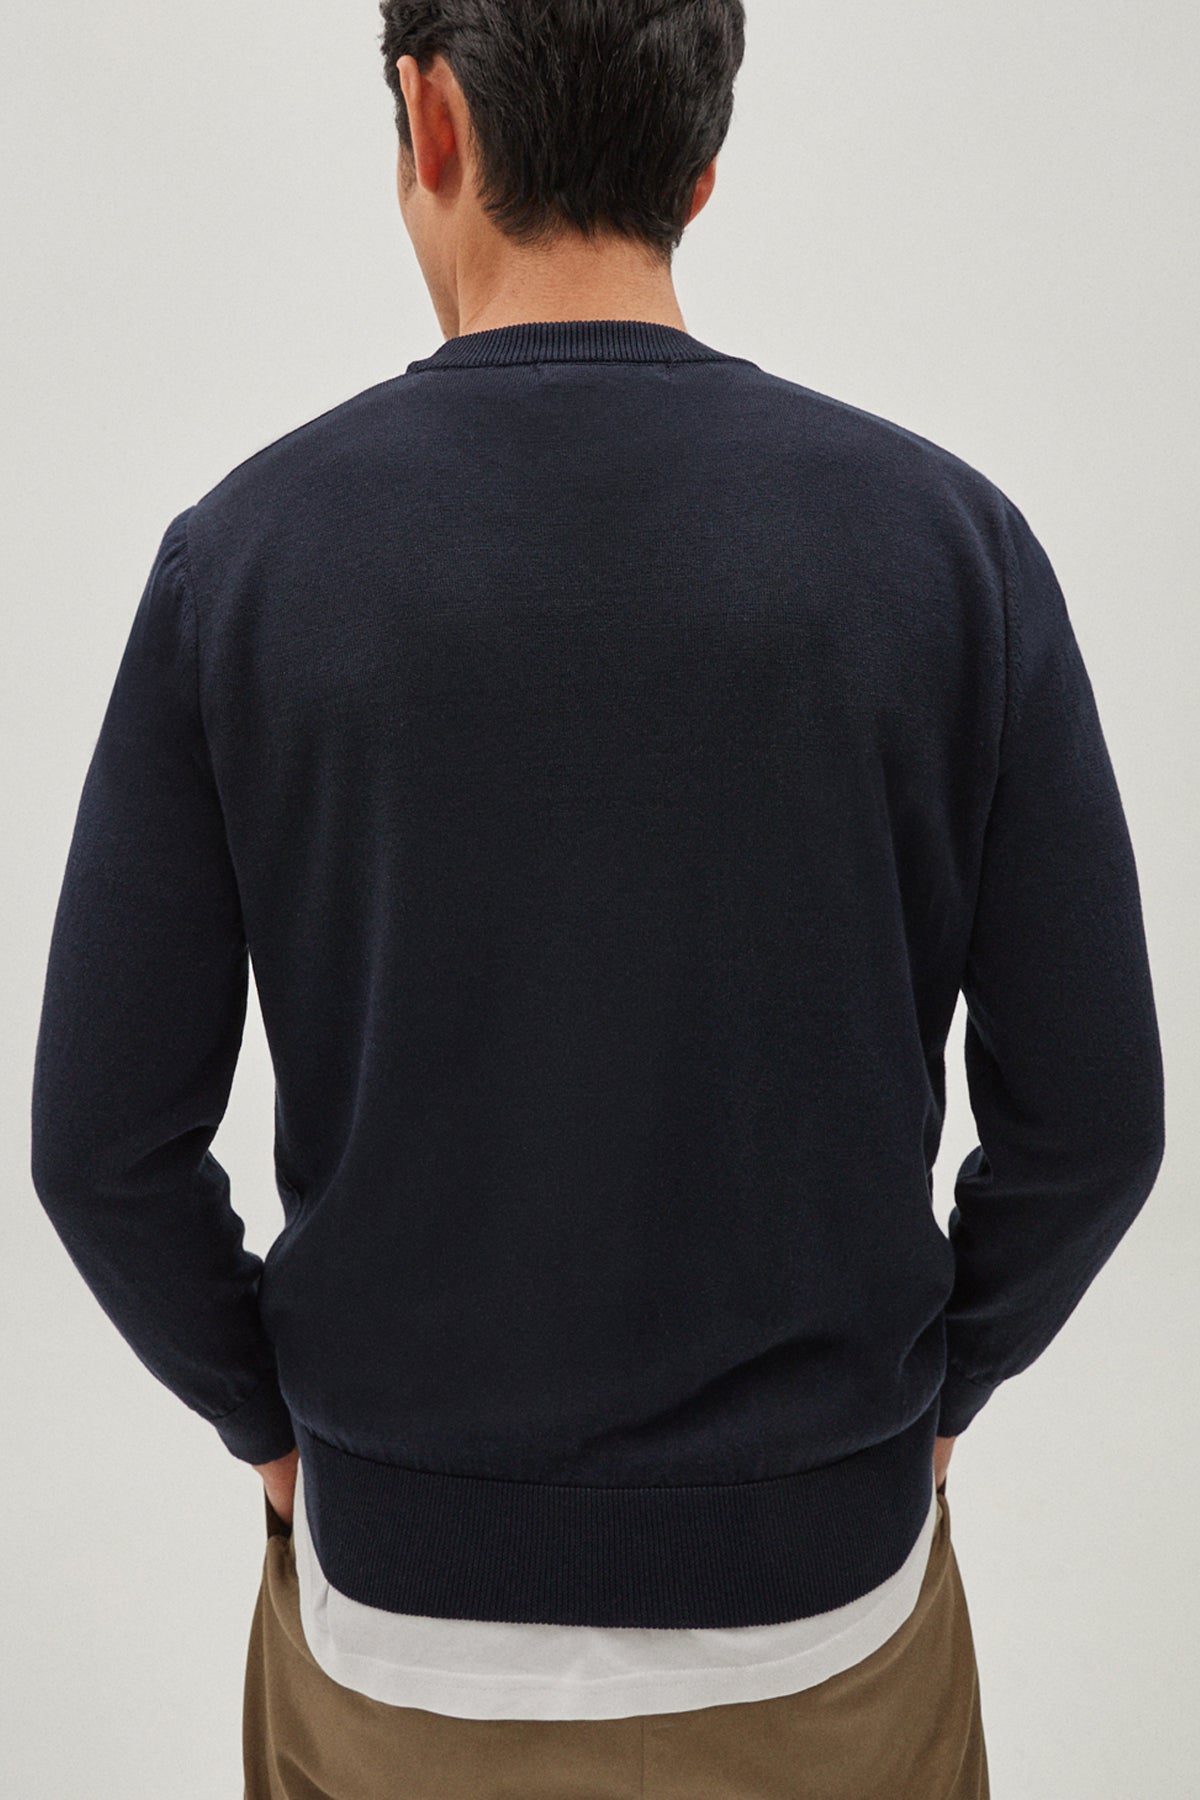 Blue Navy | The Silk-Cotton Sweater – Imperfect Version